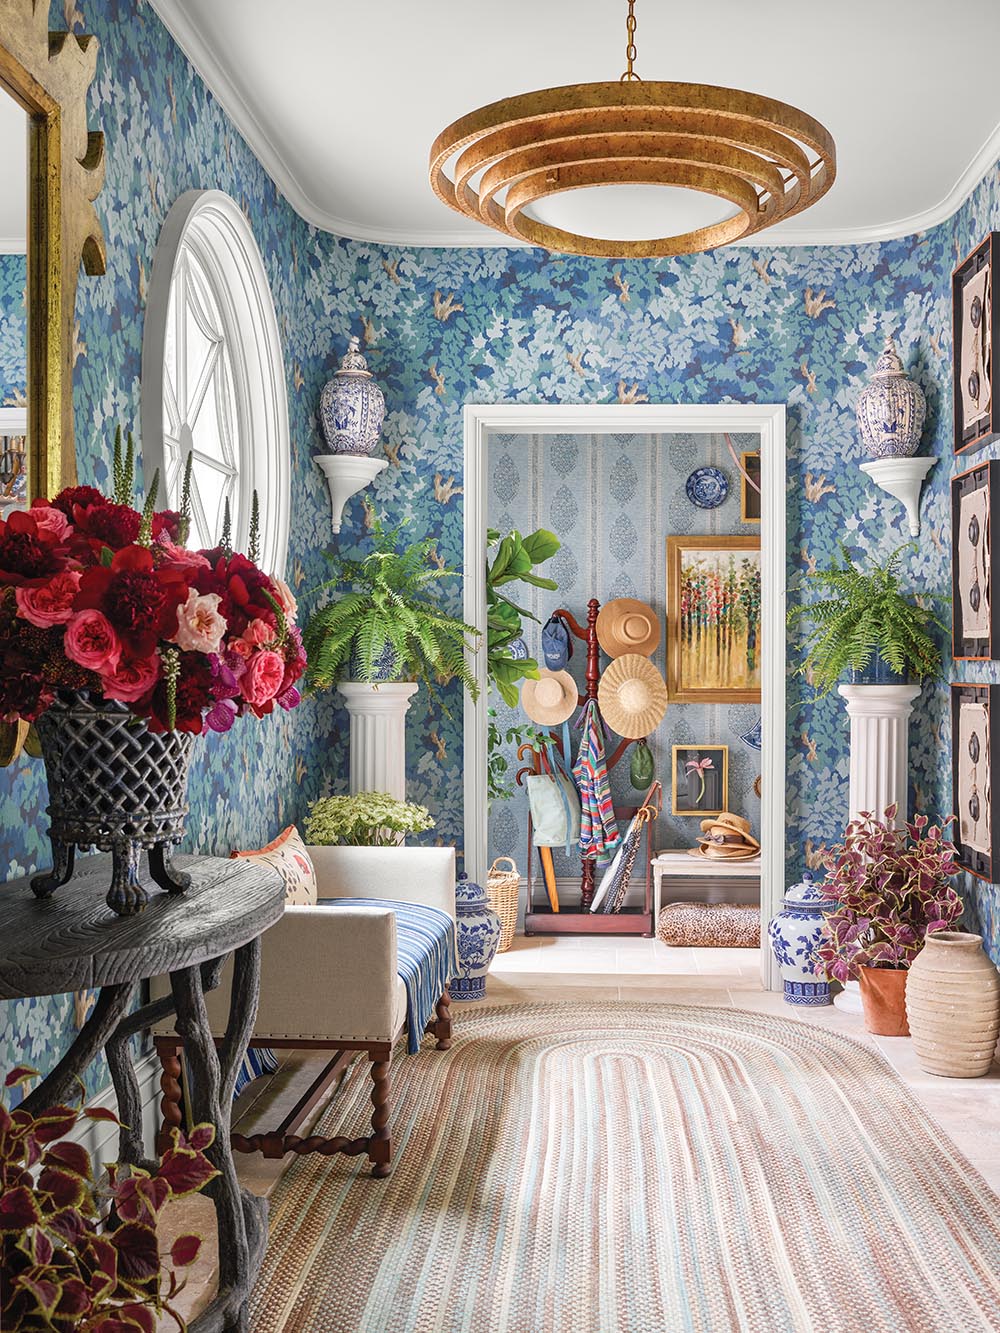 Hallway with blue floral tapestry wallpaper, demilune table with large arrangement of peonies, round window and round light fixture.